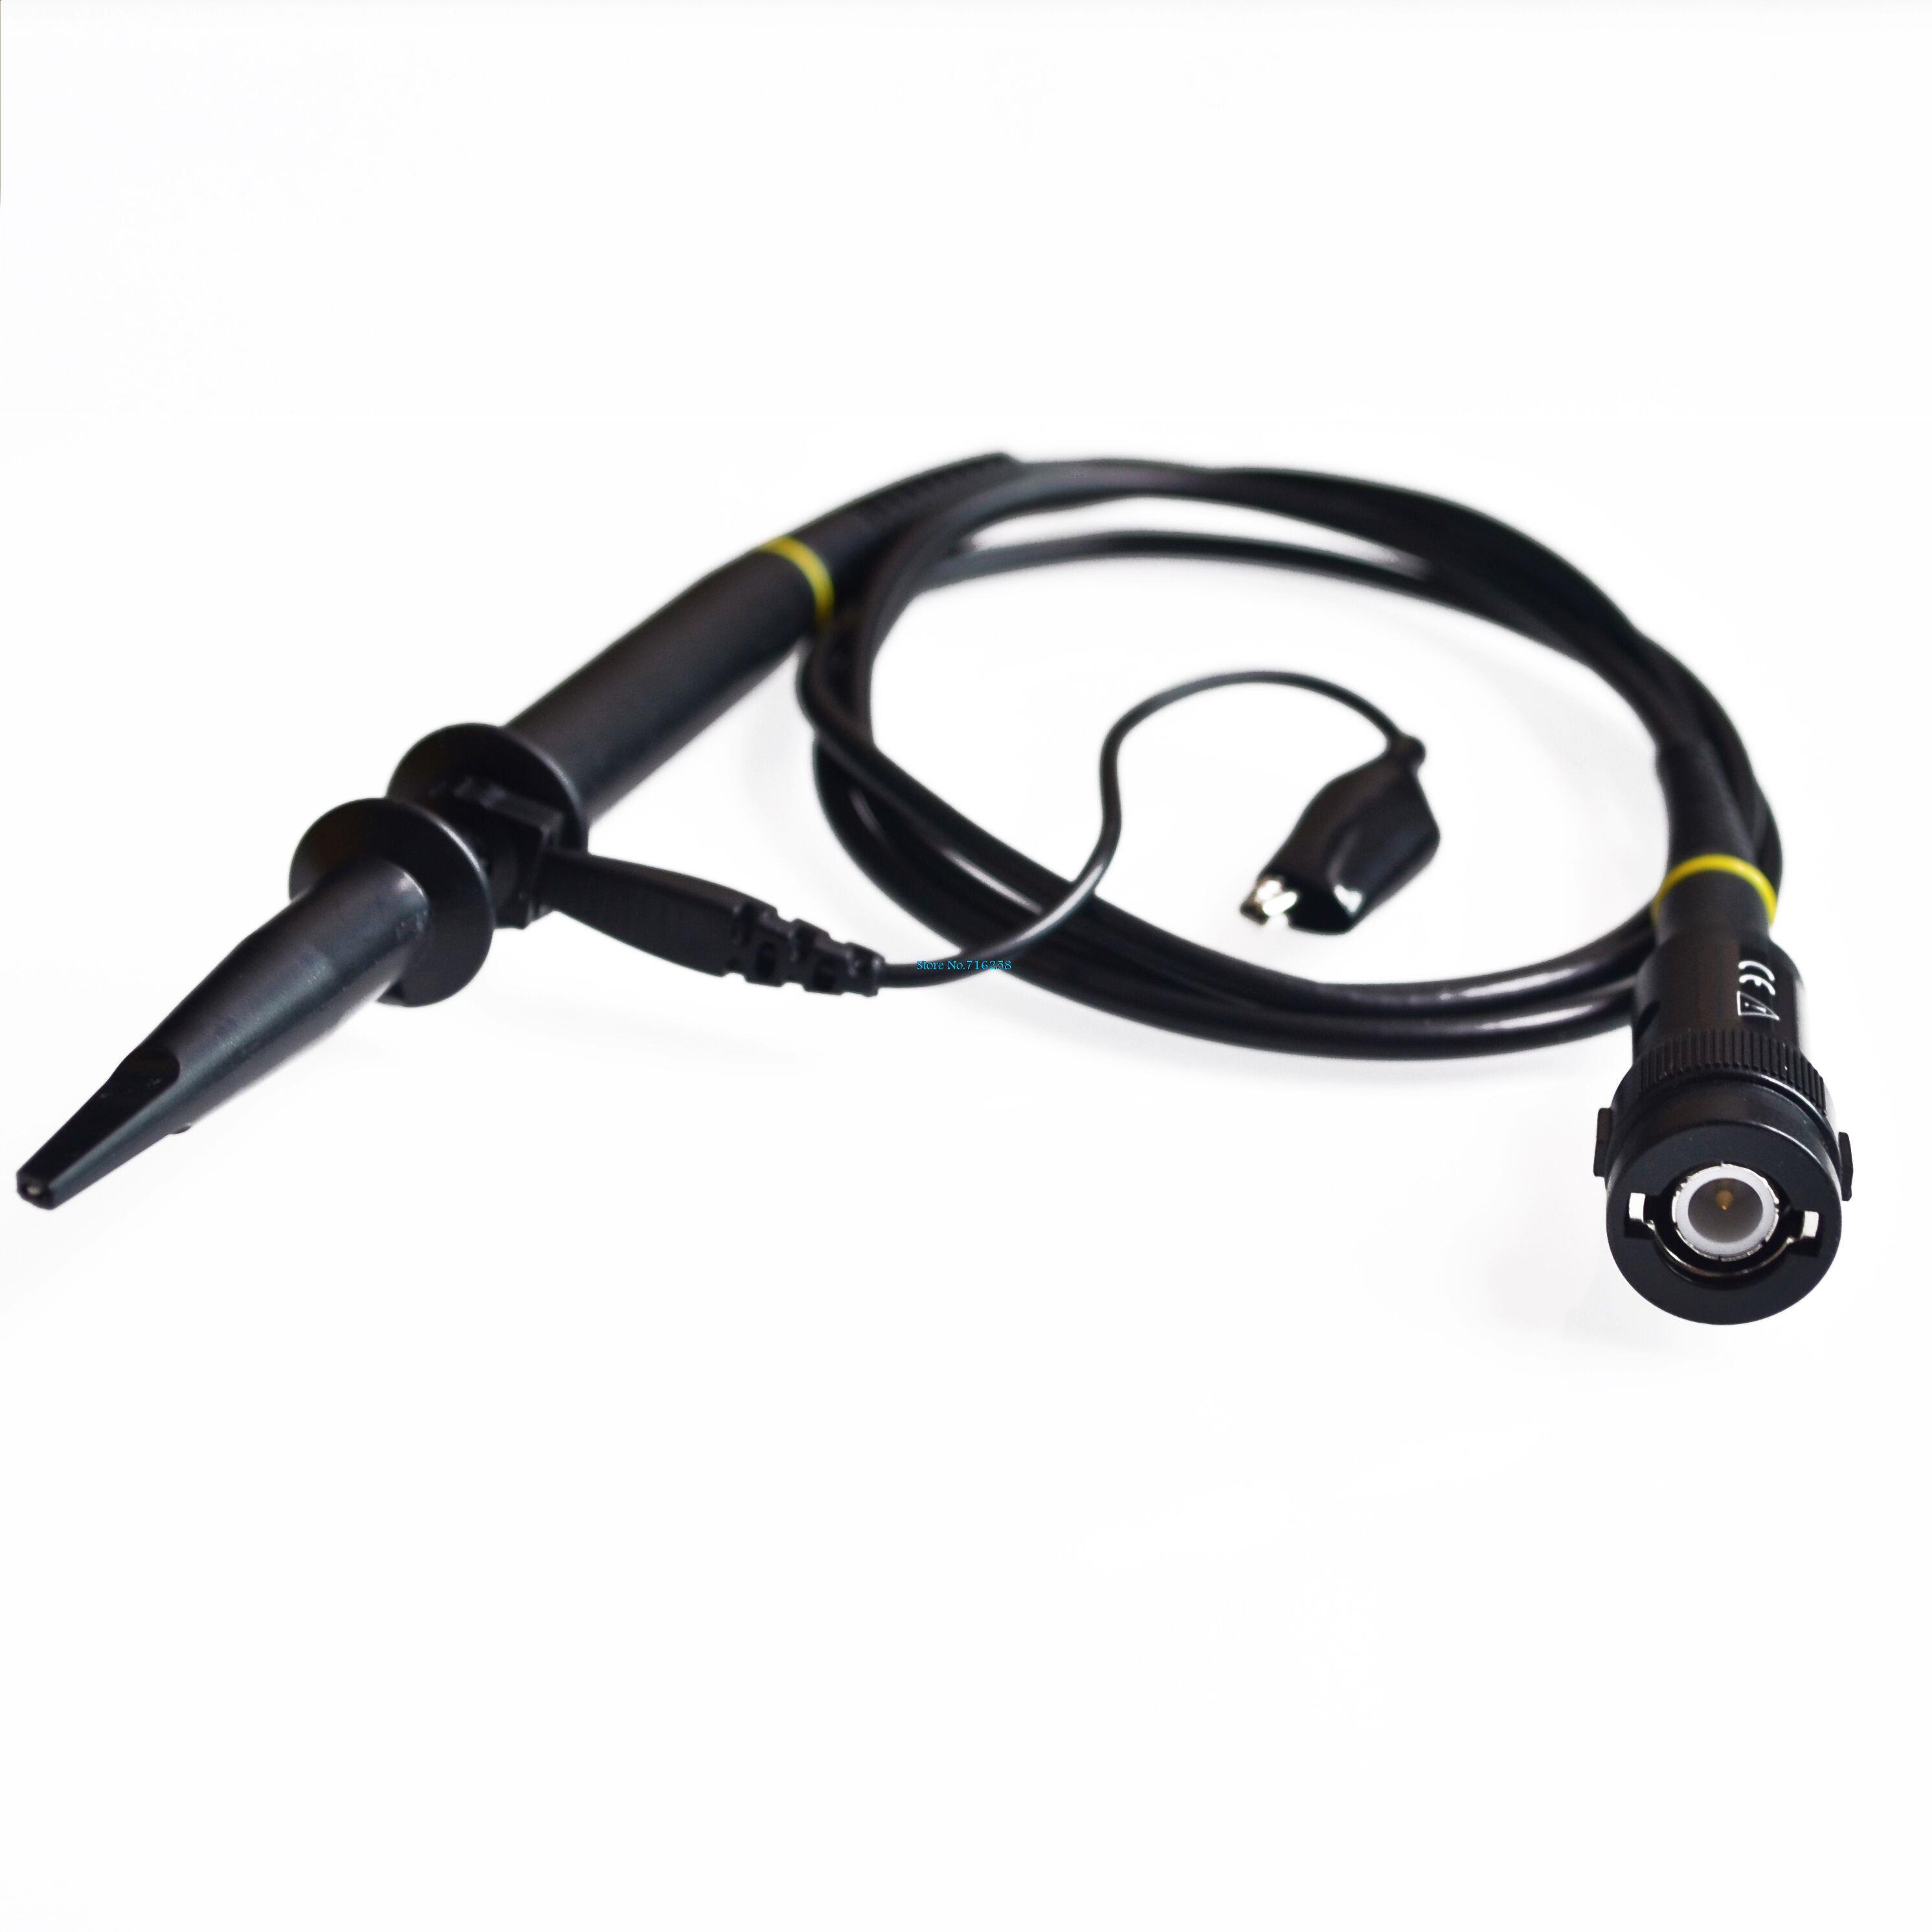 P4100-Oscilloscope-Probe-100-1-High-Voltage-Withstand-2KV-100MHz